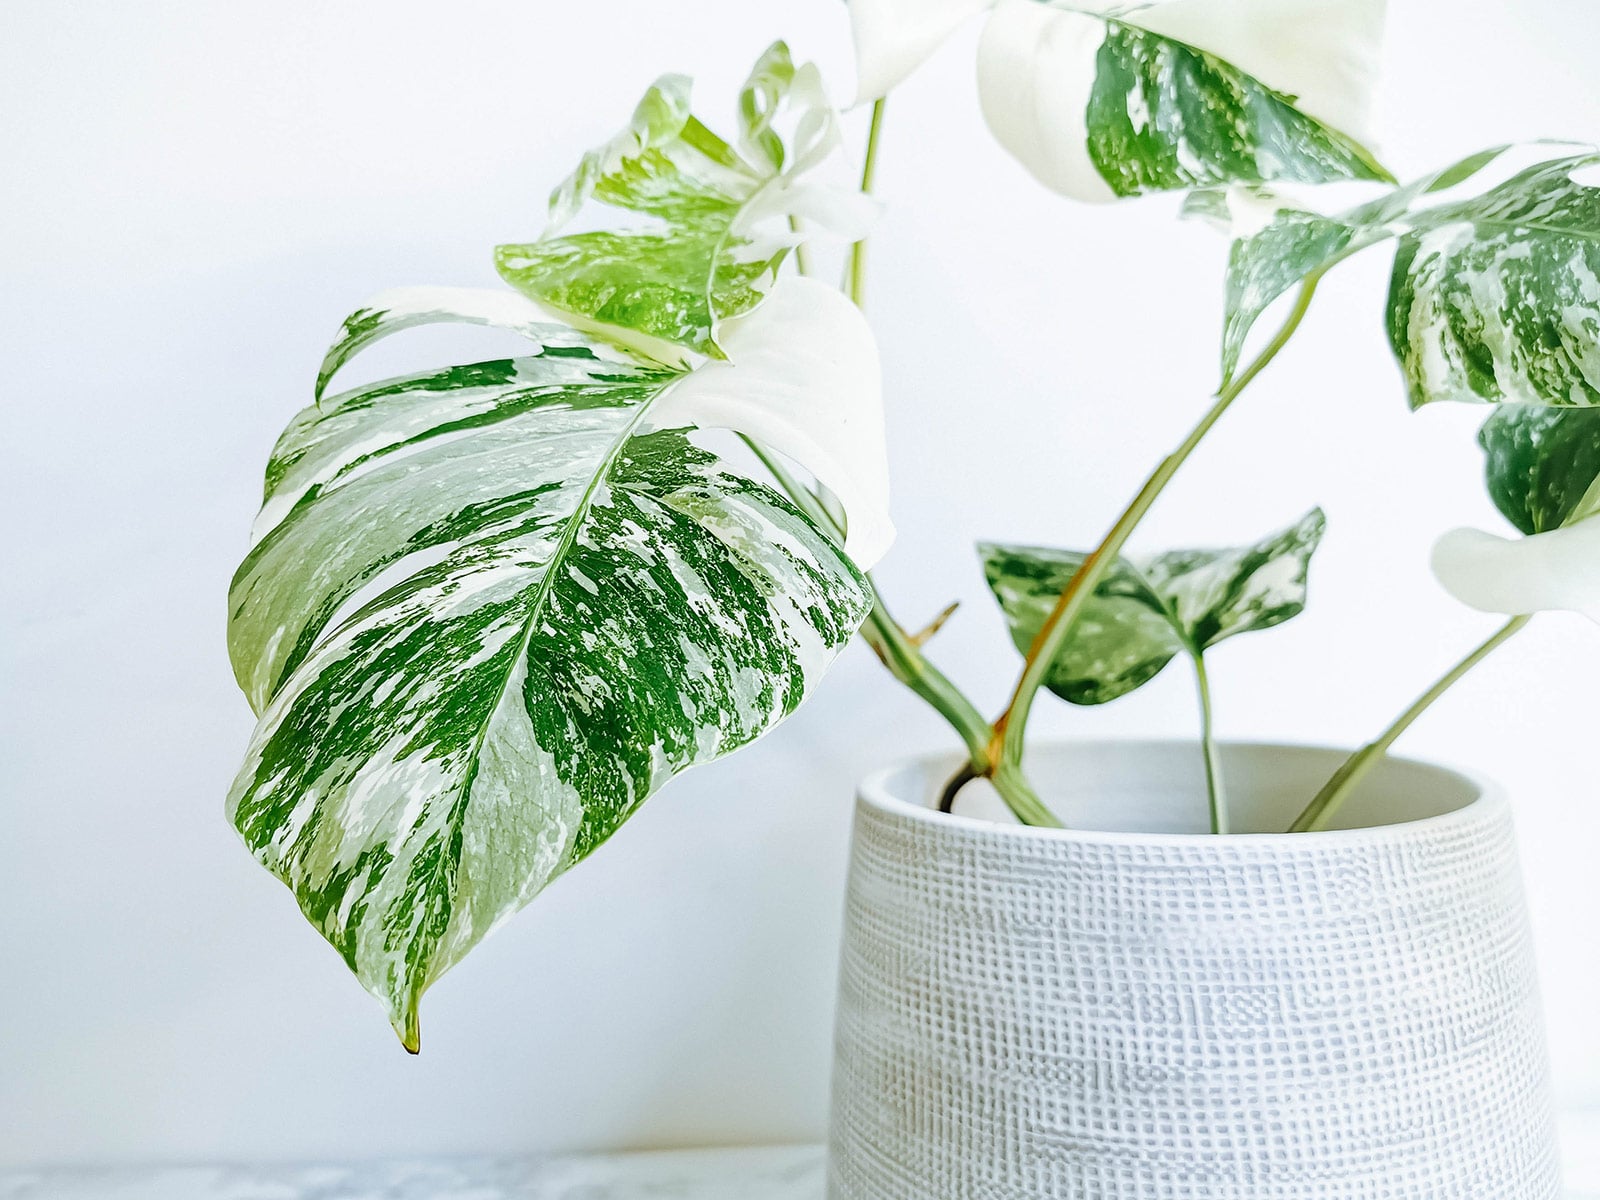 A small variegated Monstera deliciosa houseplant in a white textured ceramic against a white background